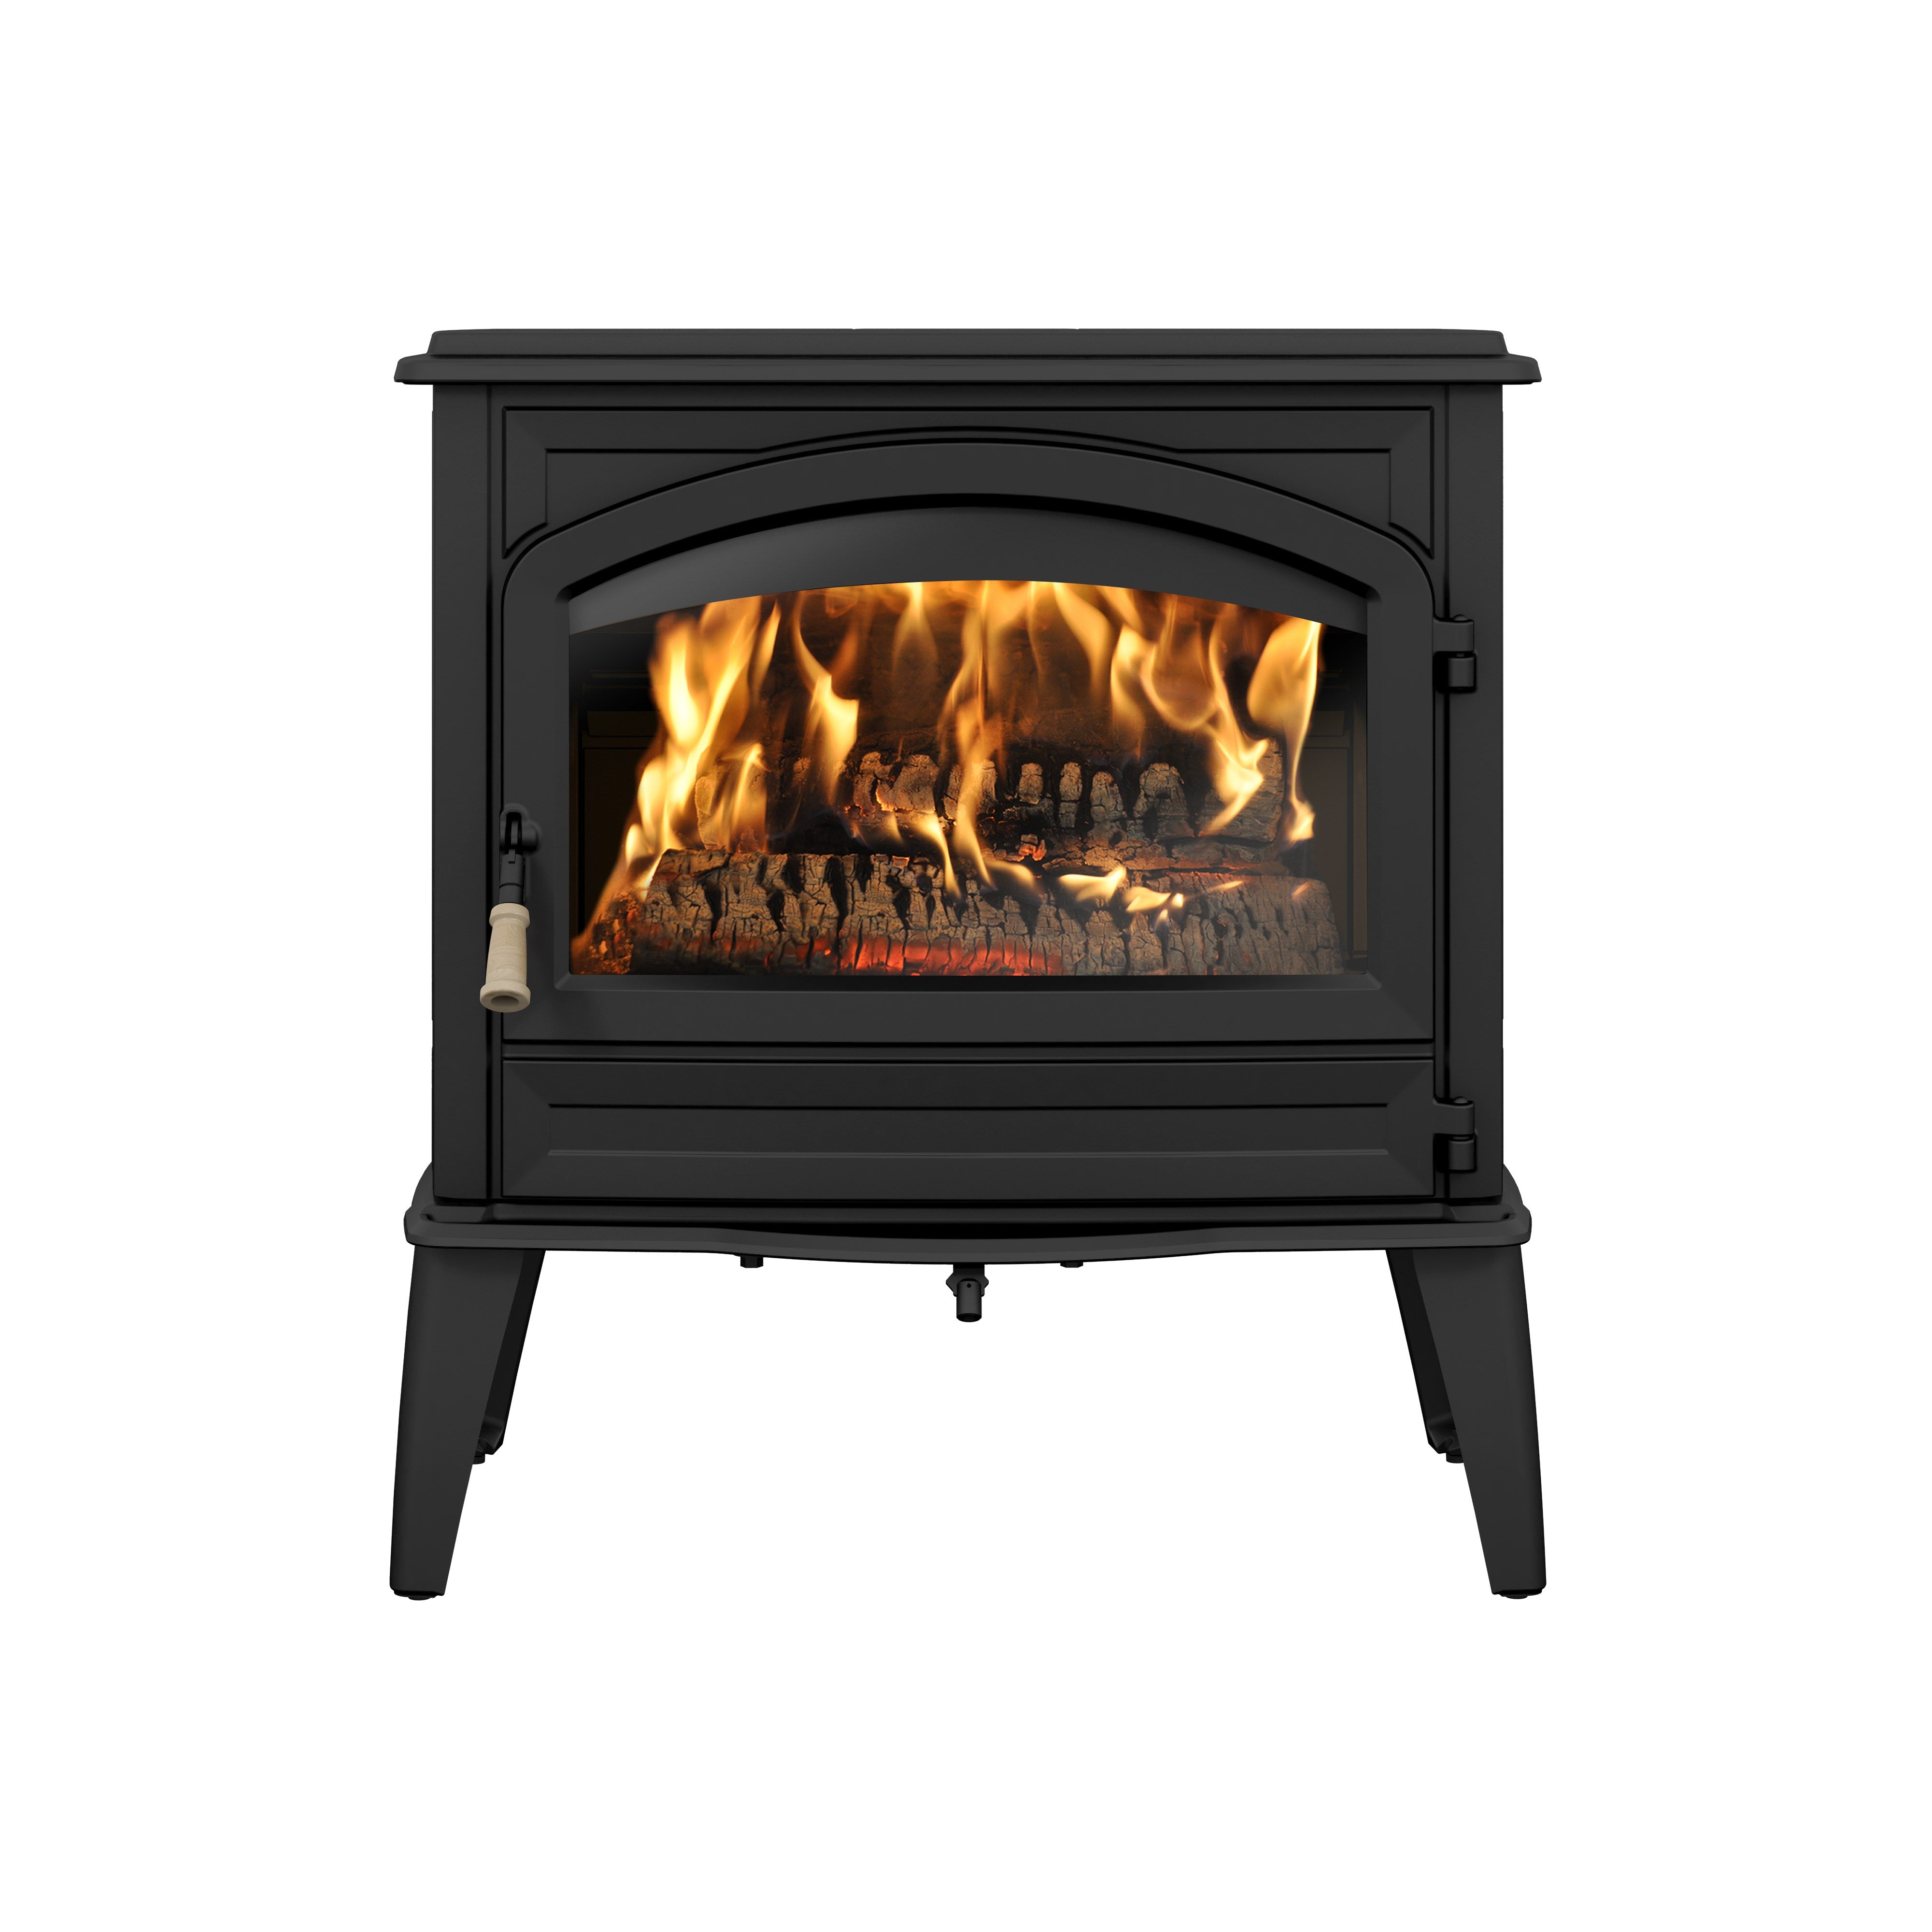 Drolet Cape Town 1800 Cast Iron Wood Stove DB04900 - New Star Living